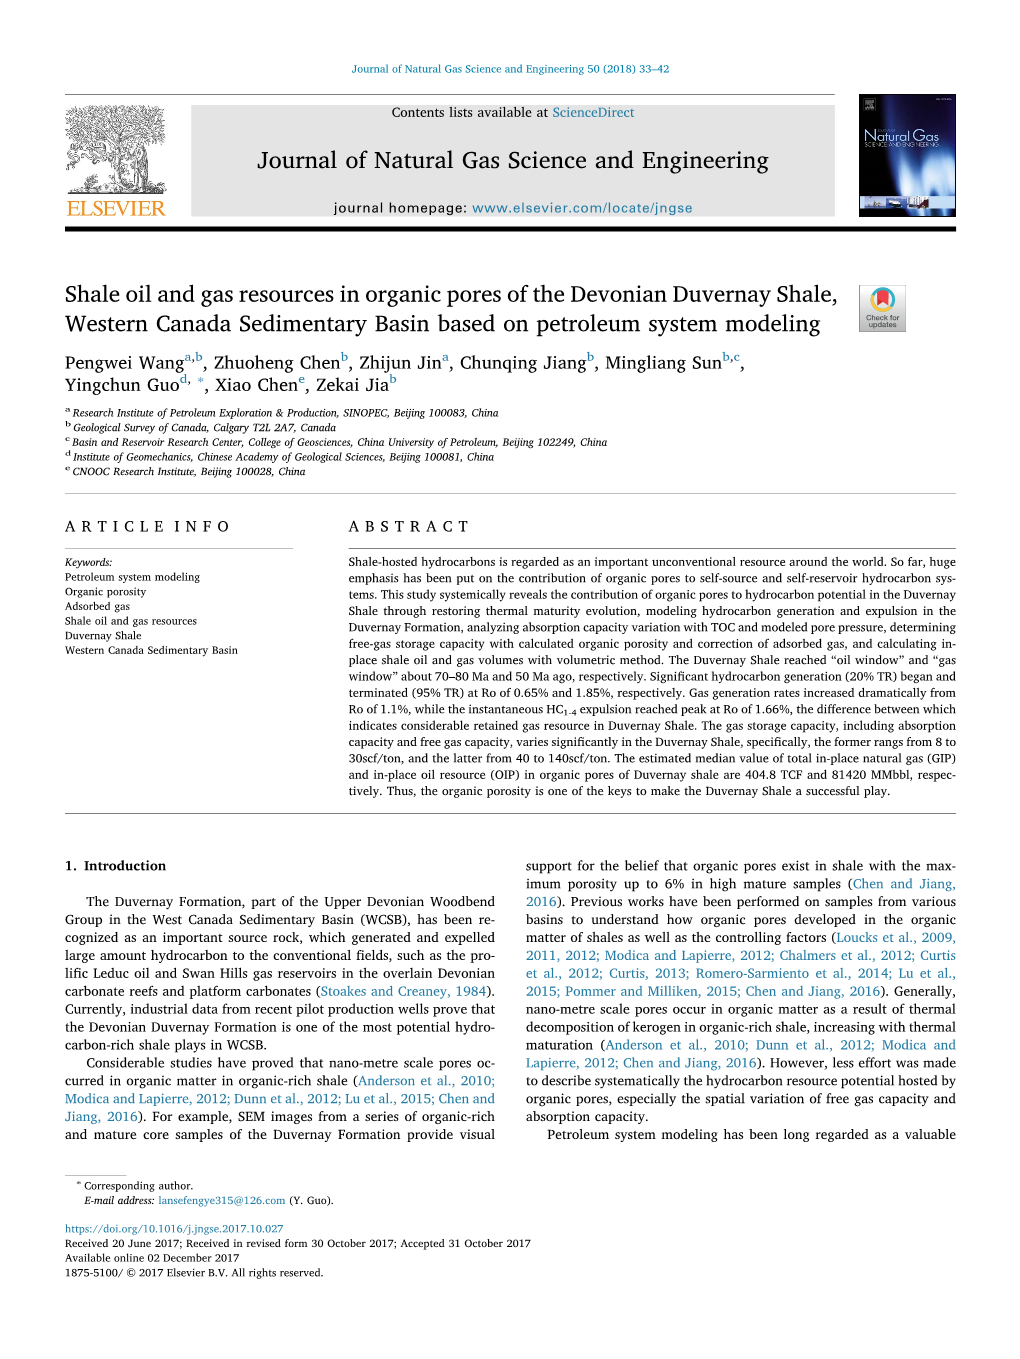 Shale Oil and Gas Resources in Organic Pores of the Devonian Duvernay Shale, Western Canada Sedimentary Basin Based on Petroleum